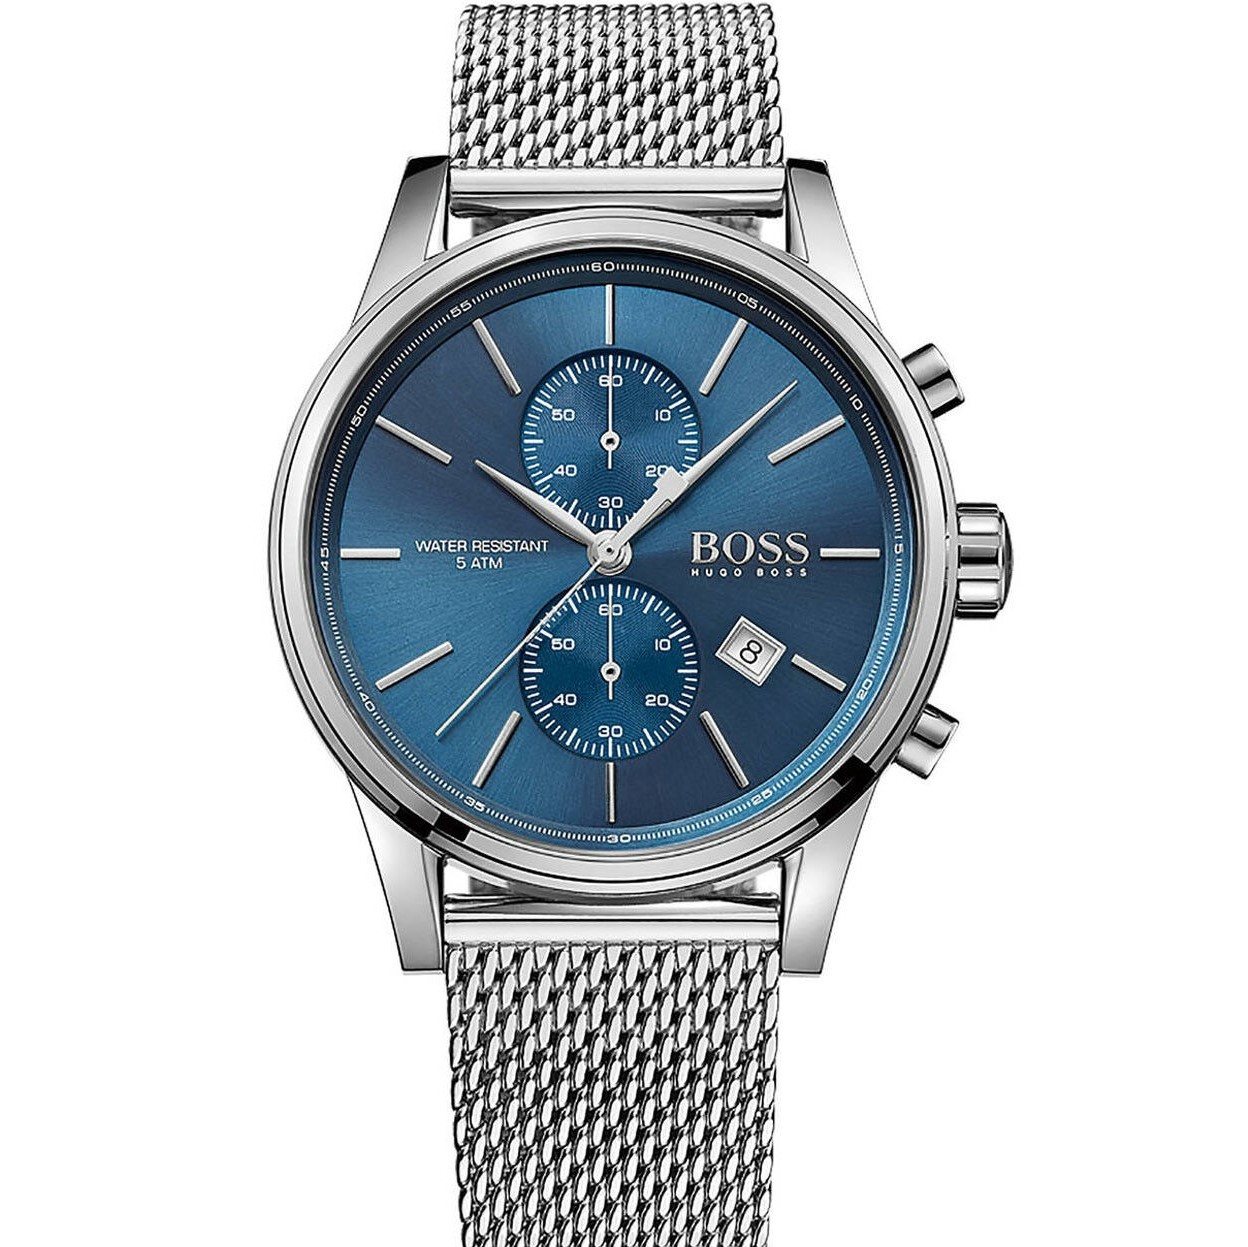 ĐỒNG HỒ ĐEO TAY NAM HUGO BOSS 1513441 MENS JET STAINLESS STEEL BLUE DIAL MESH STRAP CHRONOGRAPH WATCH 8